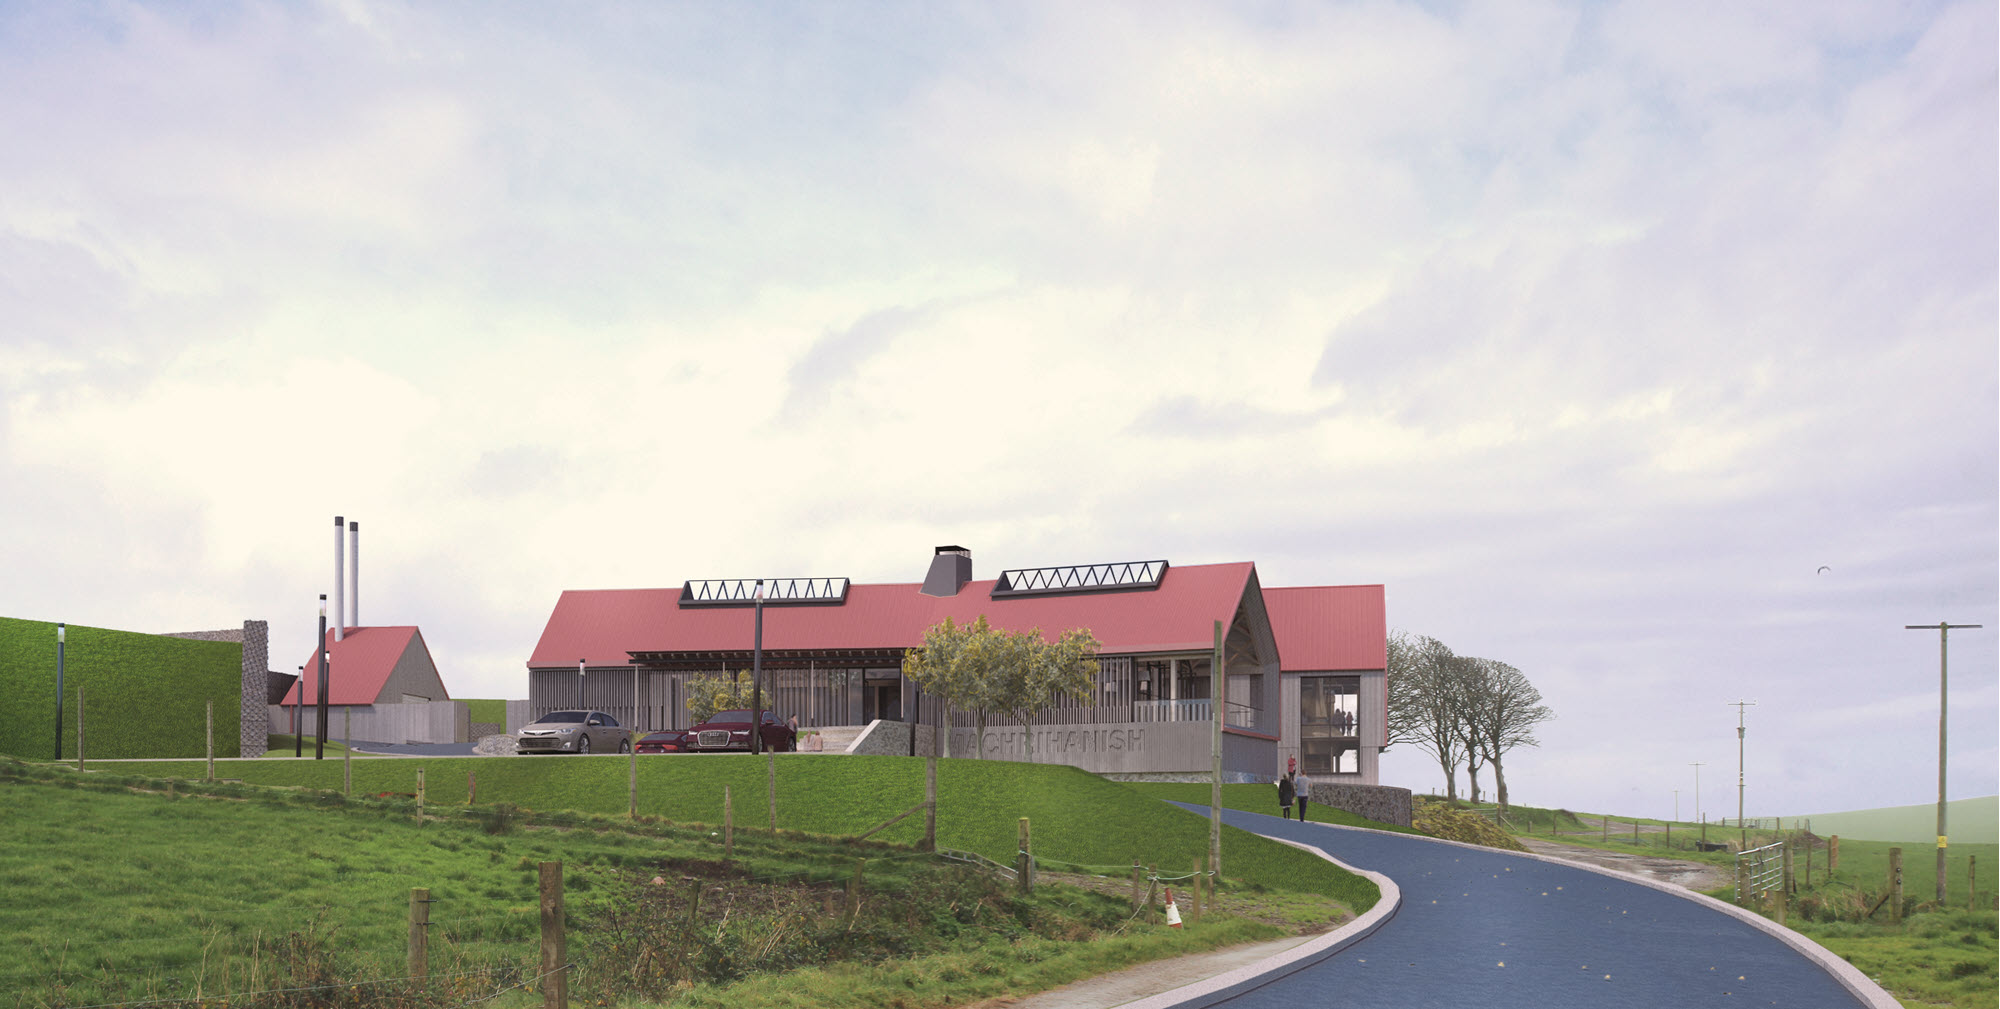 (An architect's image of the planned new Machrihanish distillery) Machrihanish distillery will promote sustainability by producing all its barley onsite